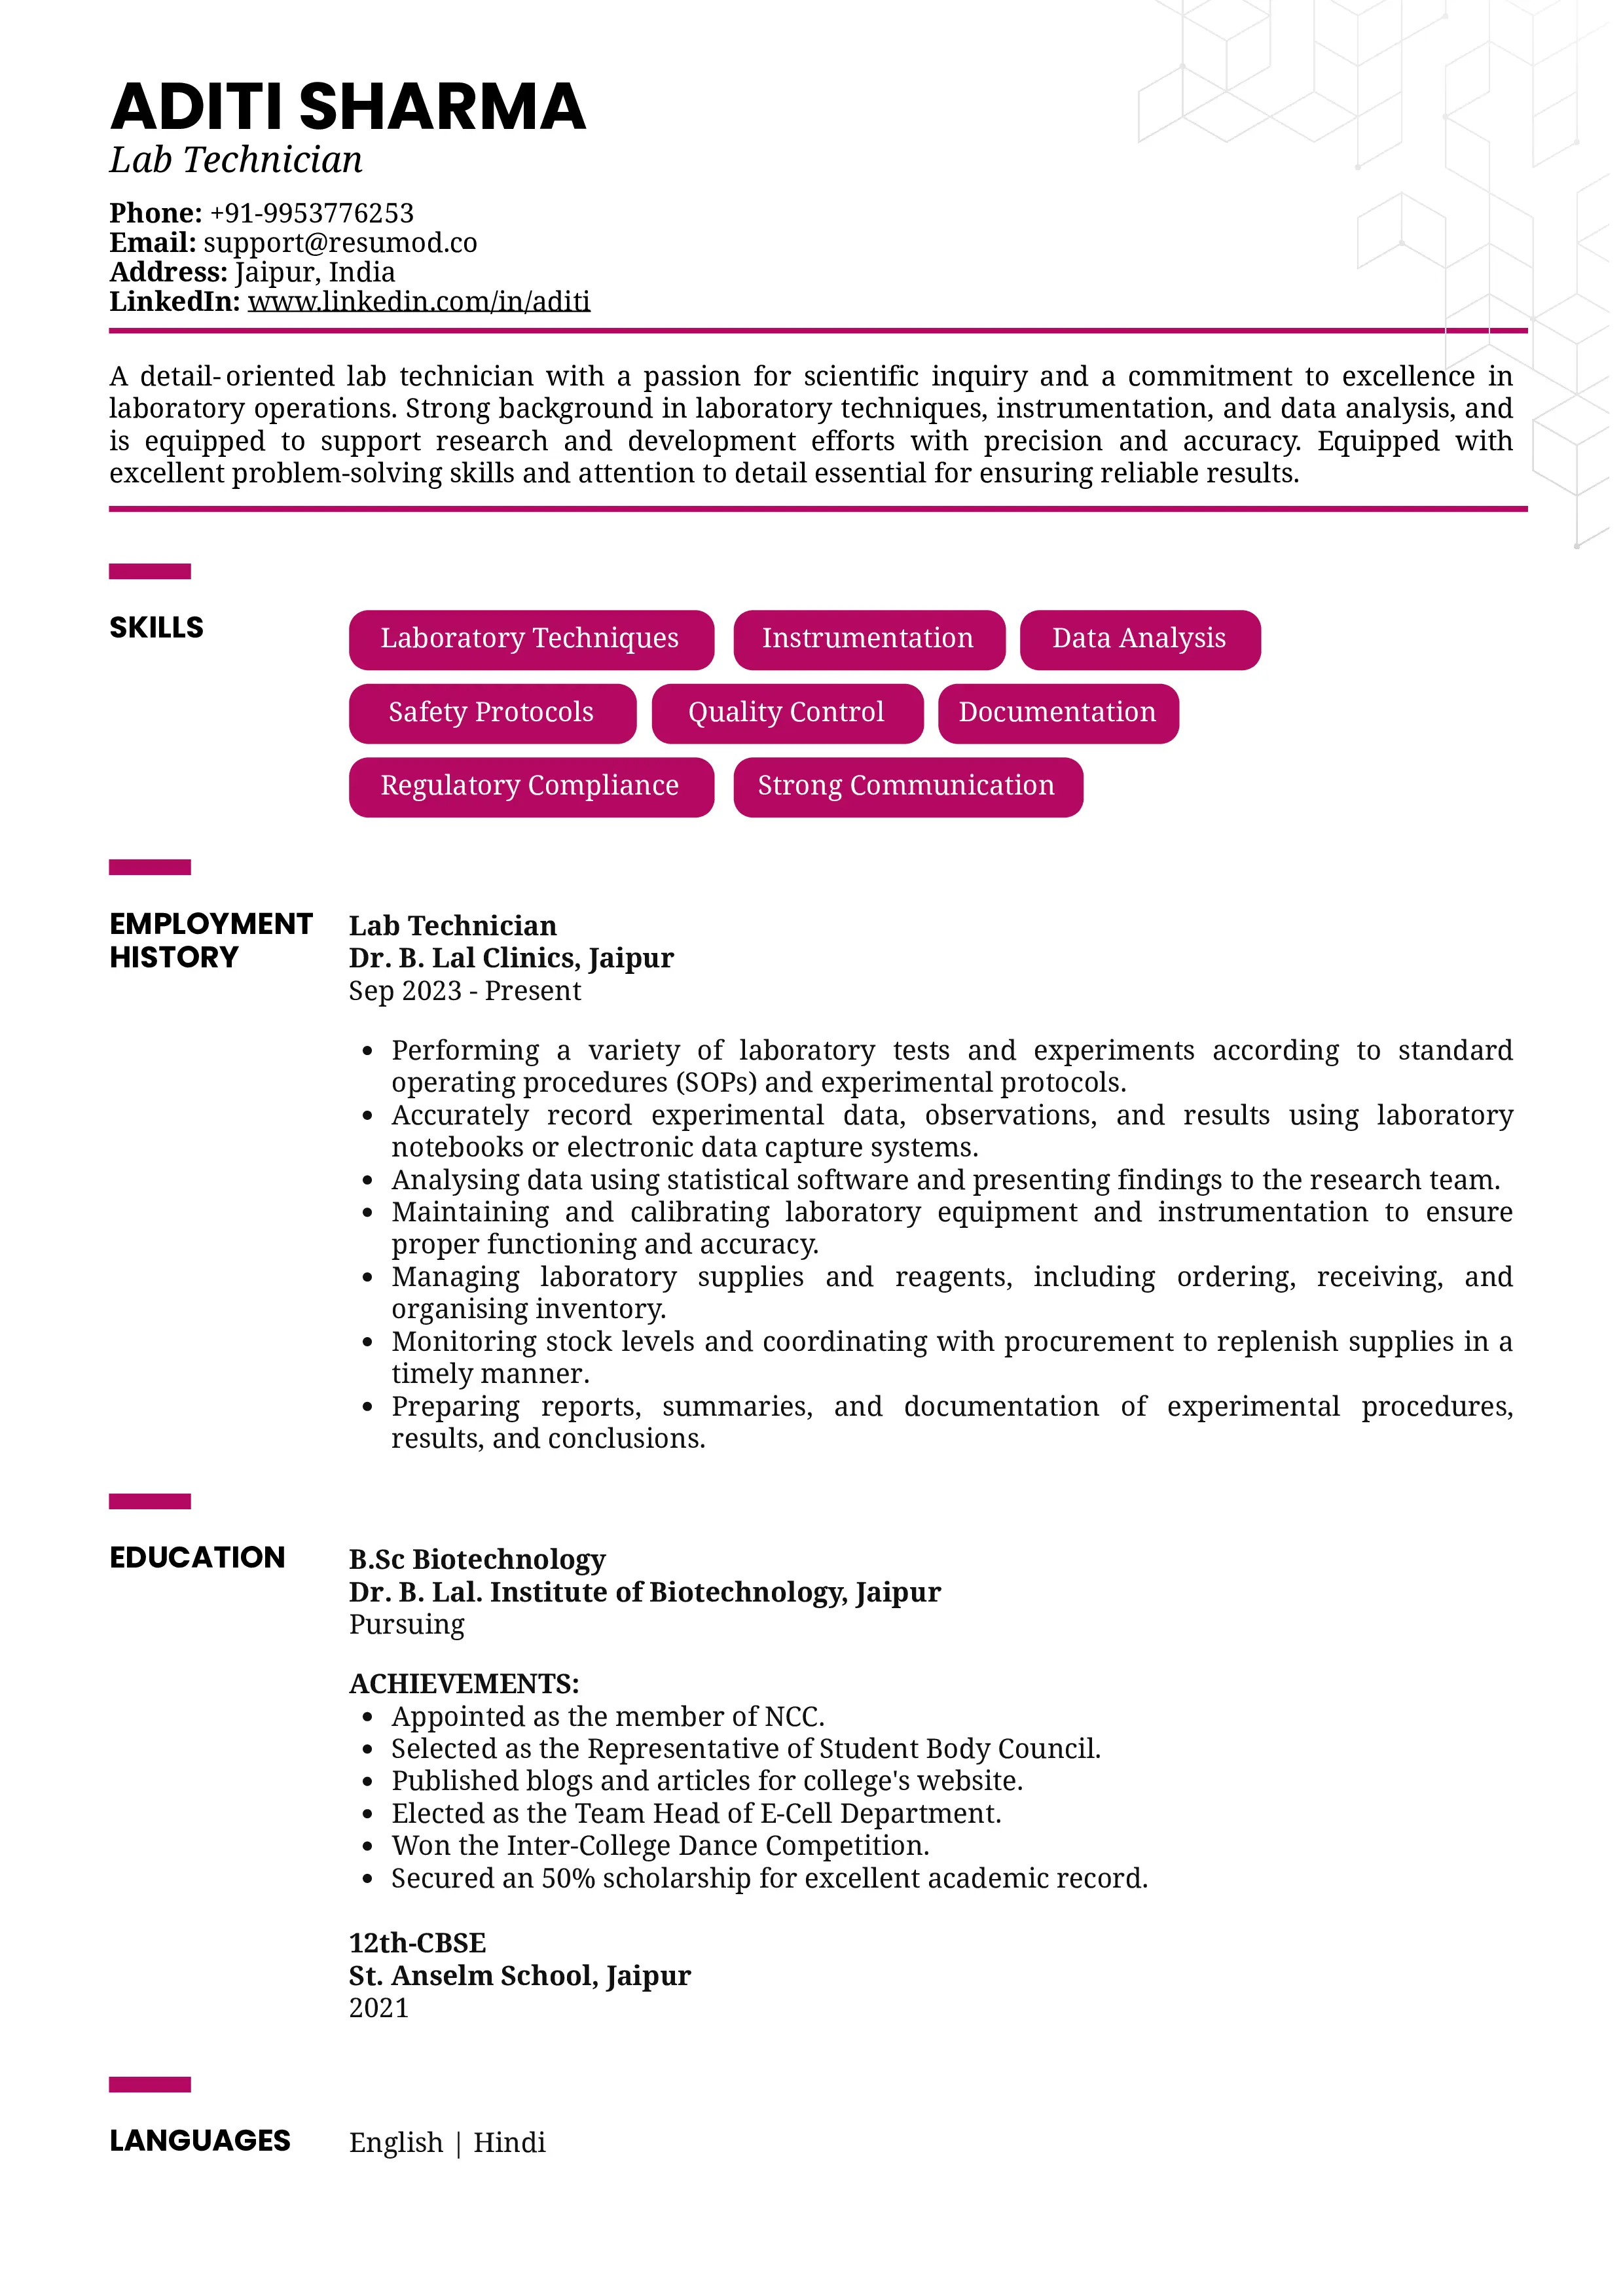 Sample Resume of Content Marketing Manager | Free Resume Templates & Samples on Resumod.co